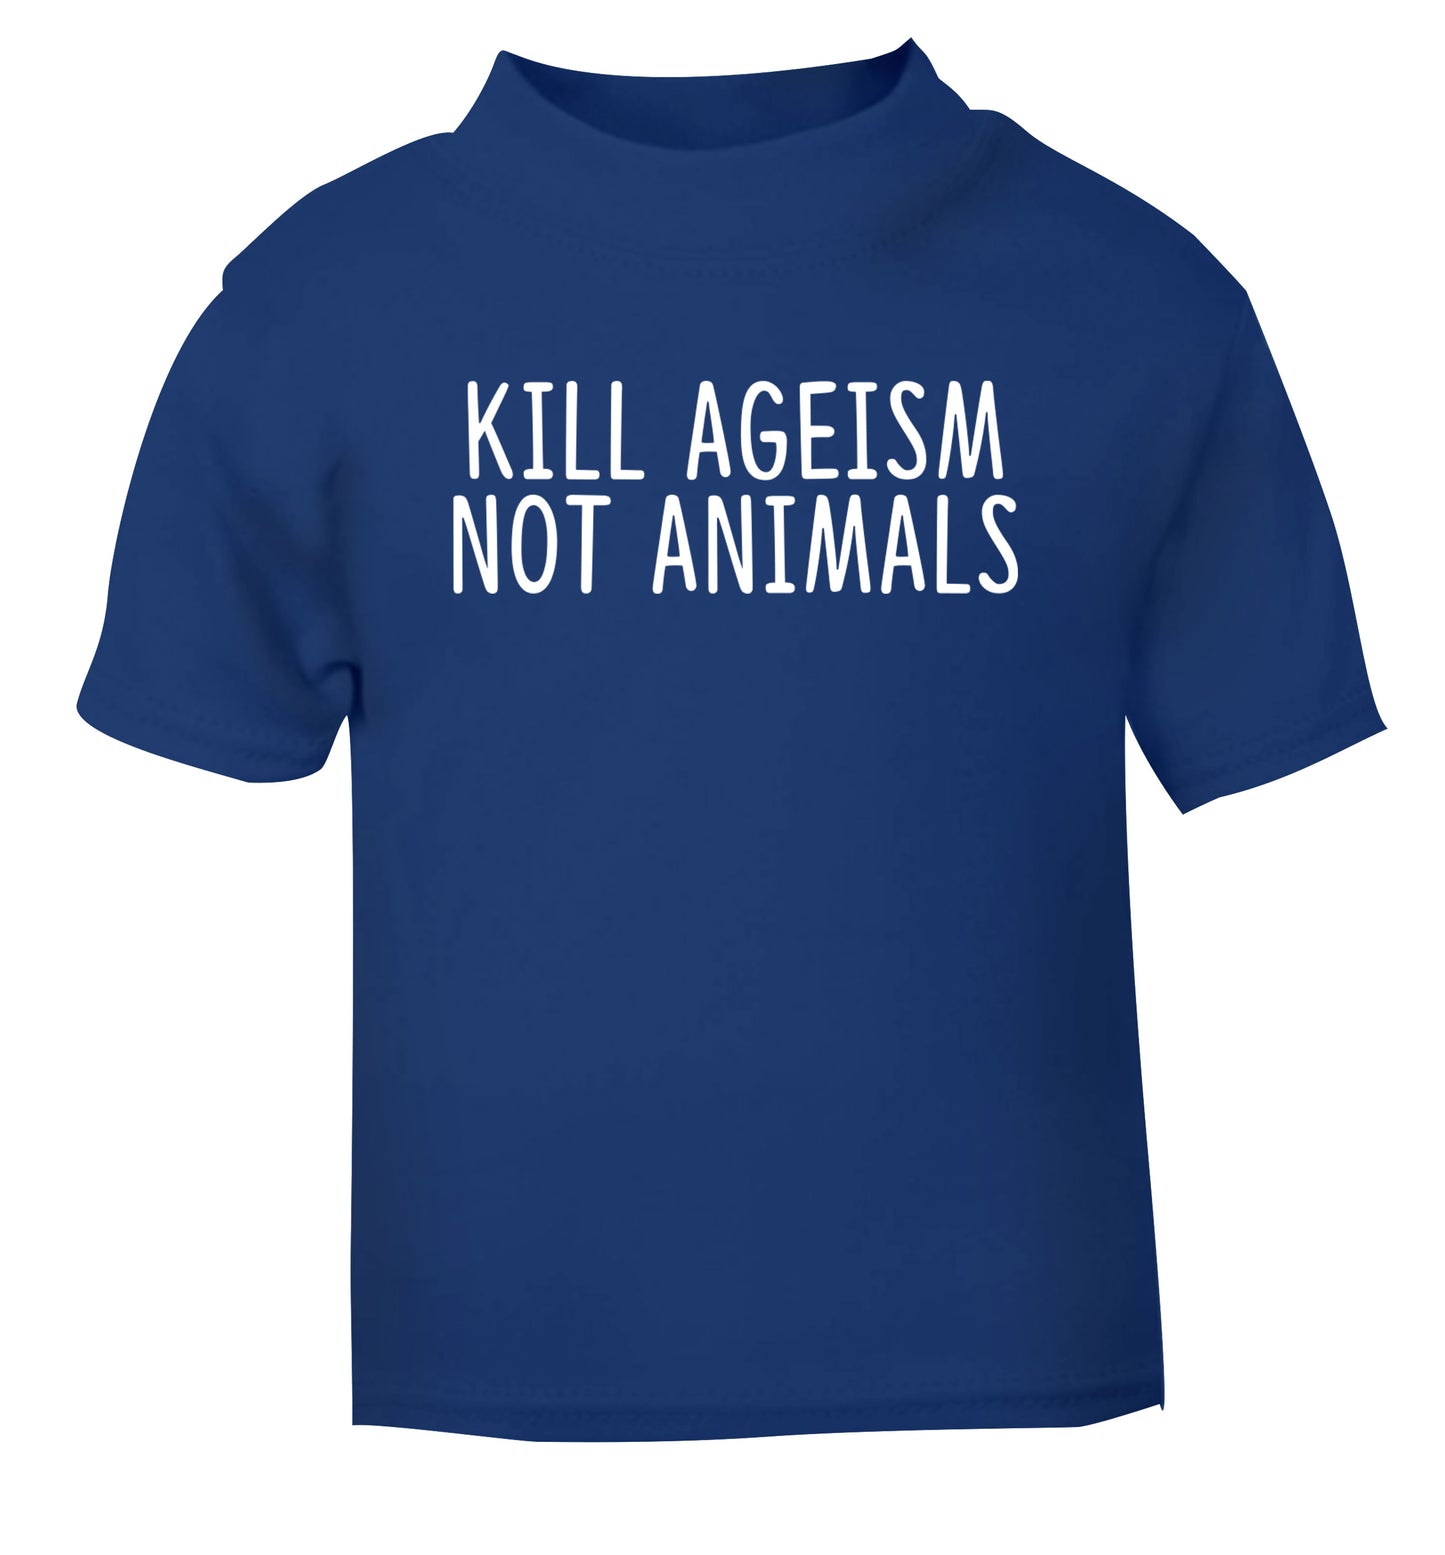 Kill Ageism Not Animals blue Baby Toddler Tshirt 2 Years